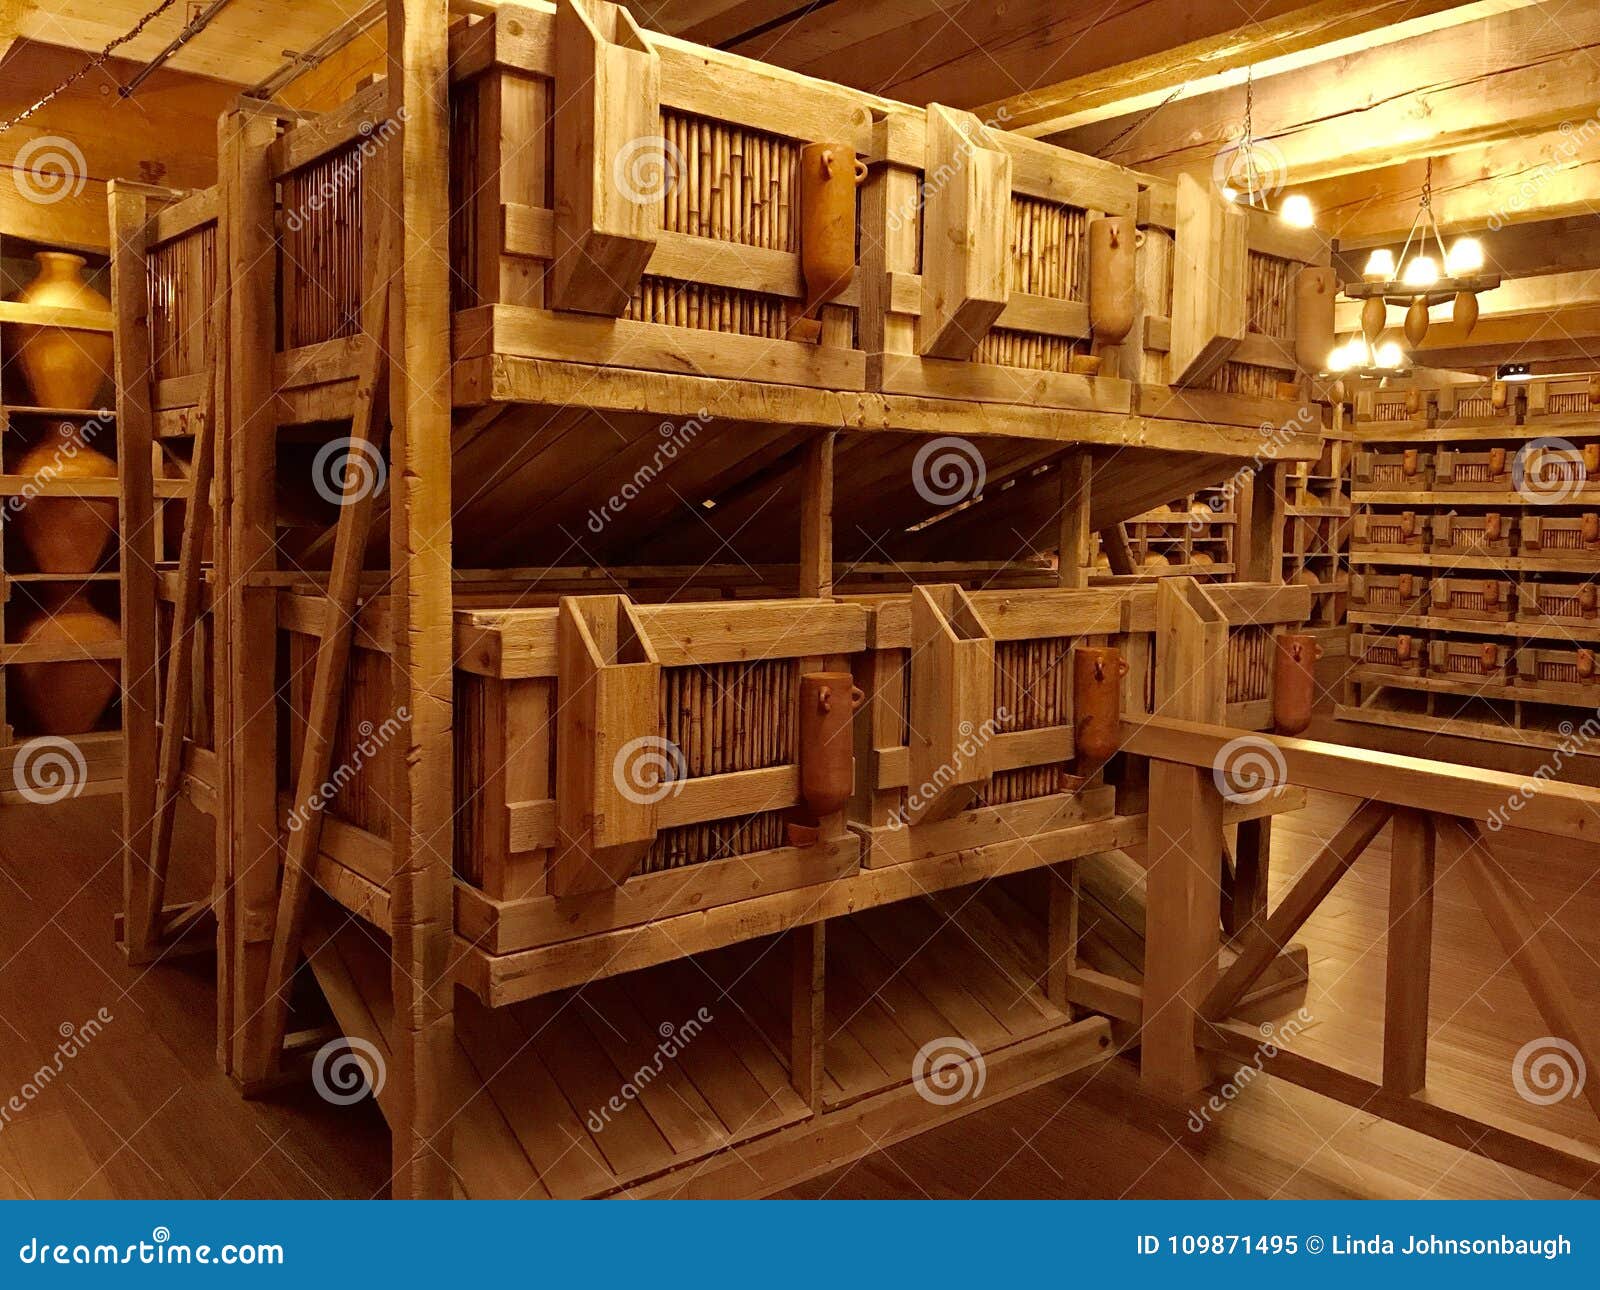 Animal Cages Inside Noah S Ark Replica At The Ark Encounter Editorial Image Image Of November Bird